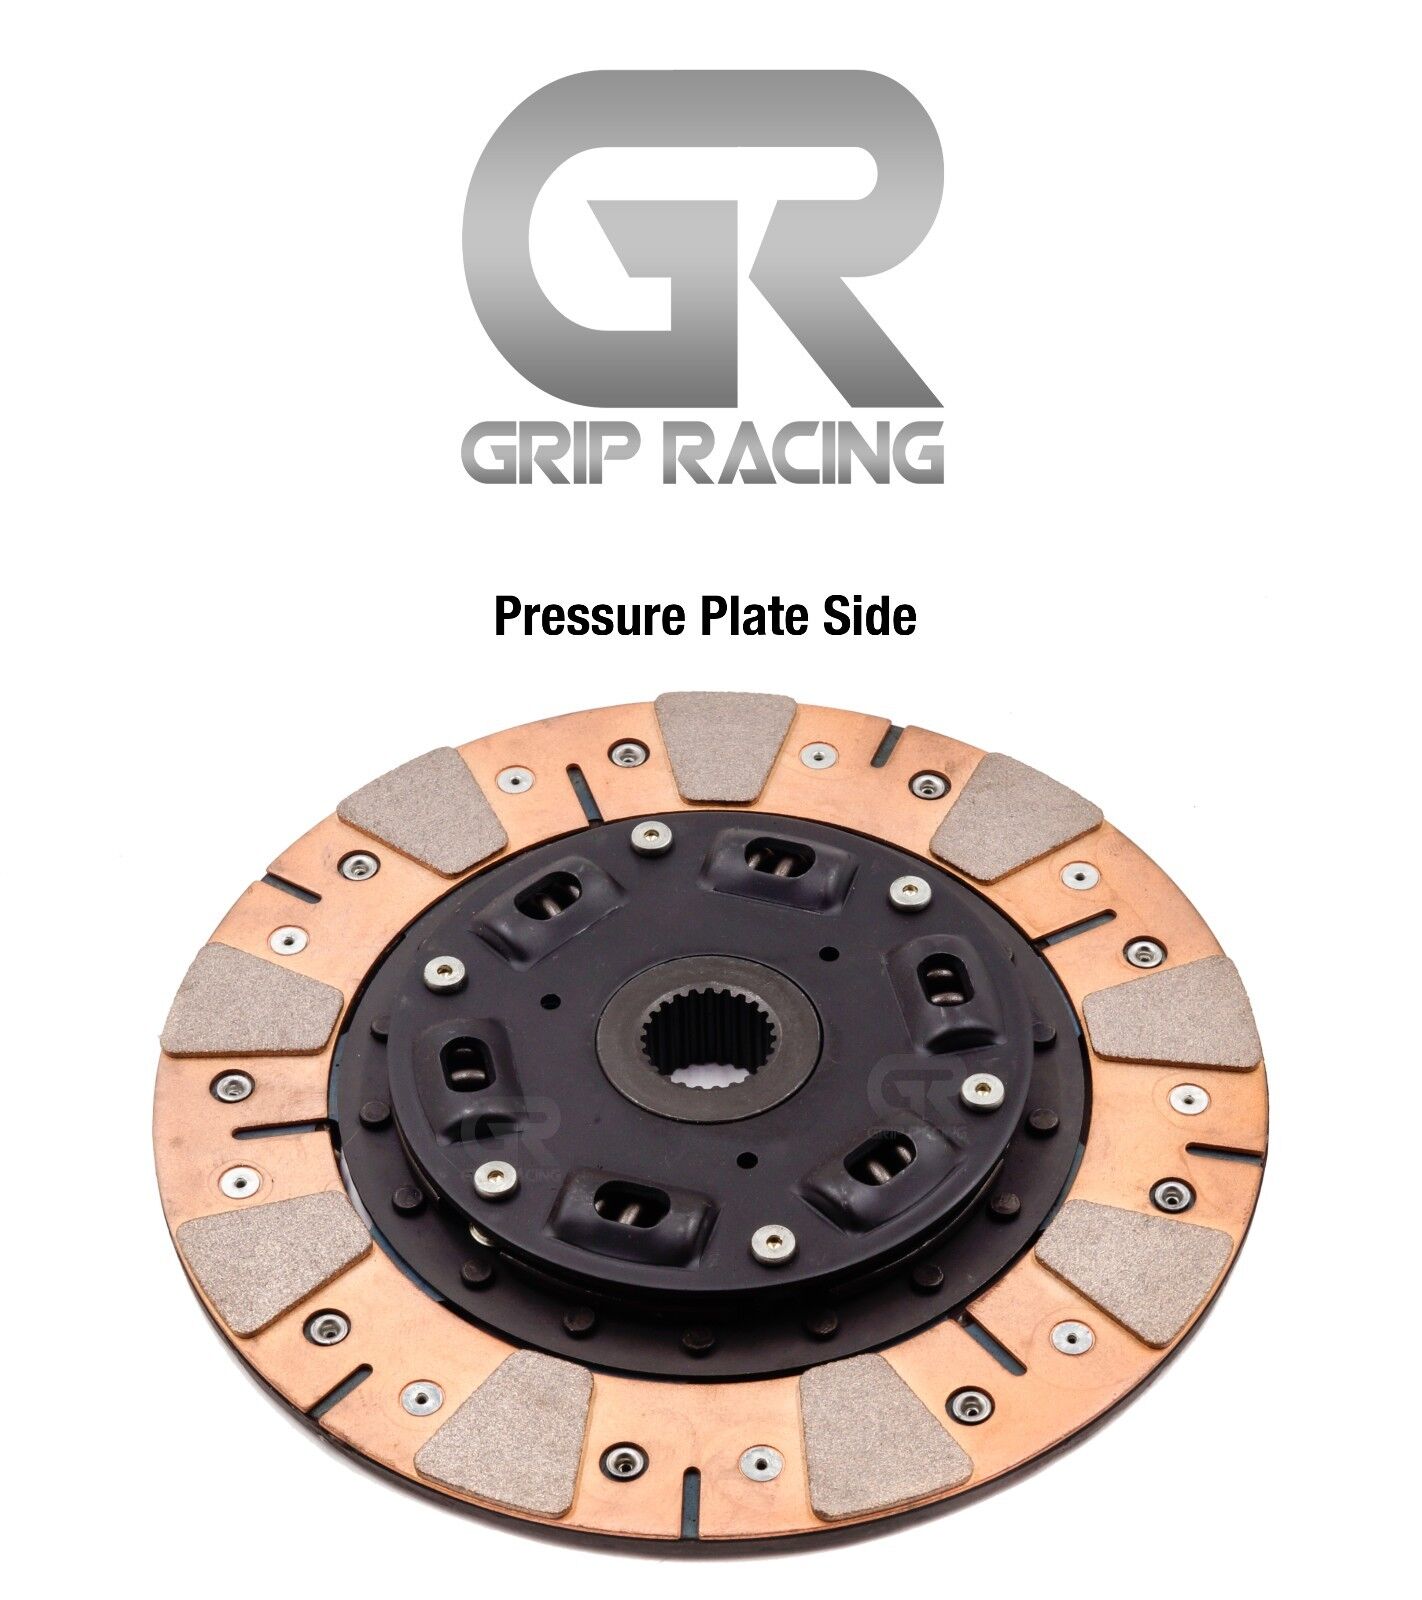 GR TWIN-FRICTION CLUTCH DISC PLATE for ACURA RSX TYPE-S HONDA CIVIC Si K20 6 SPD